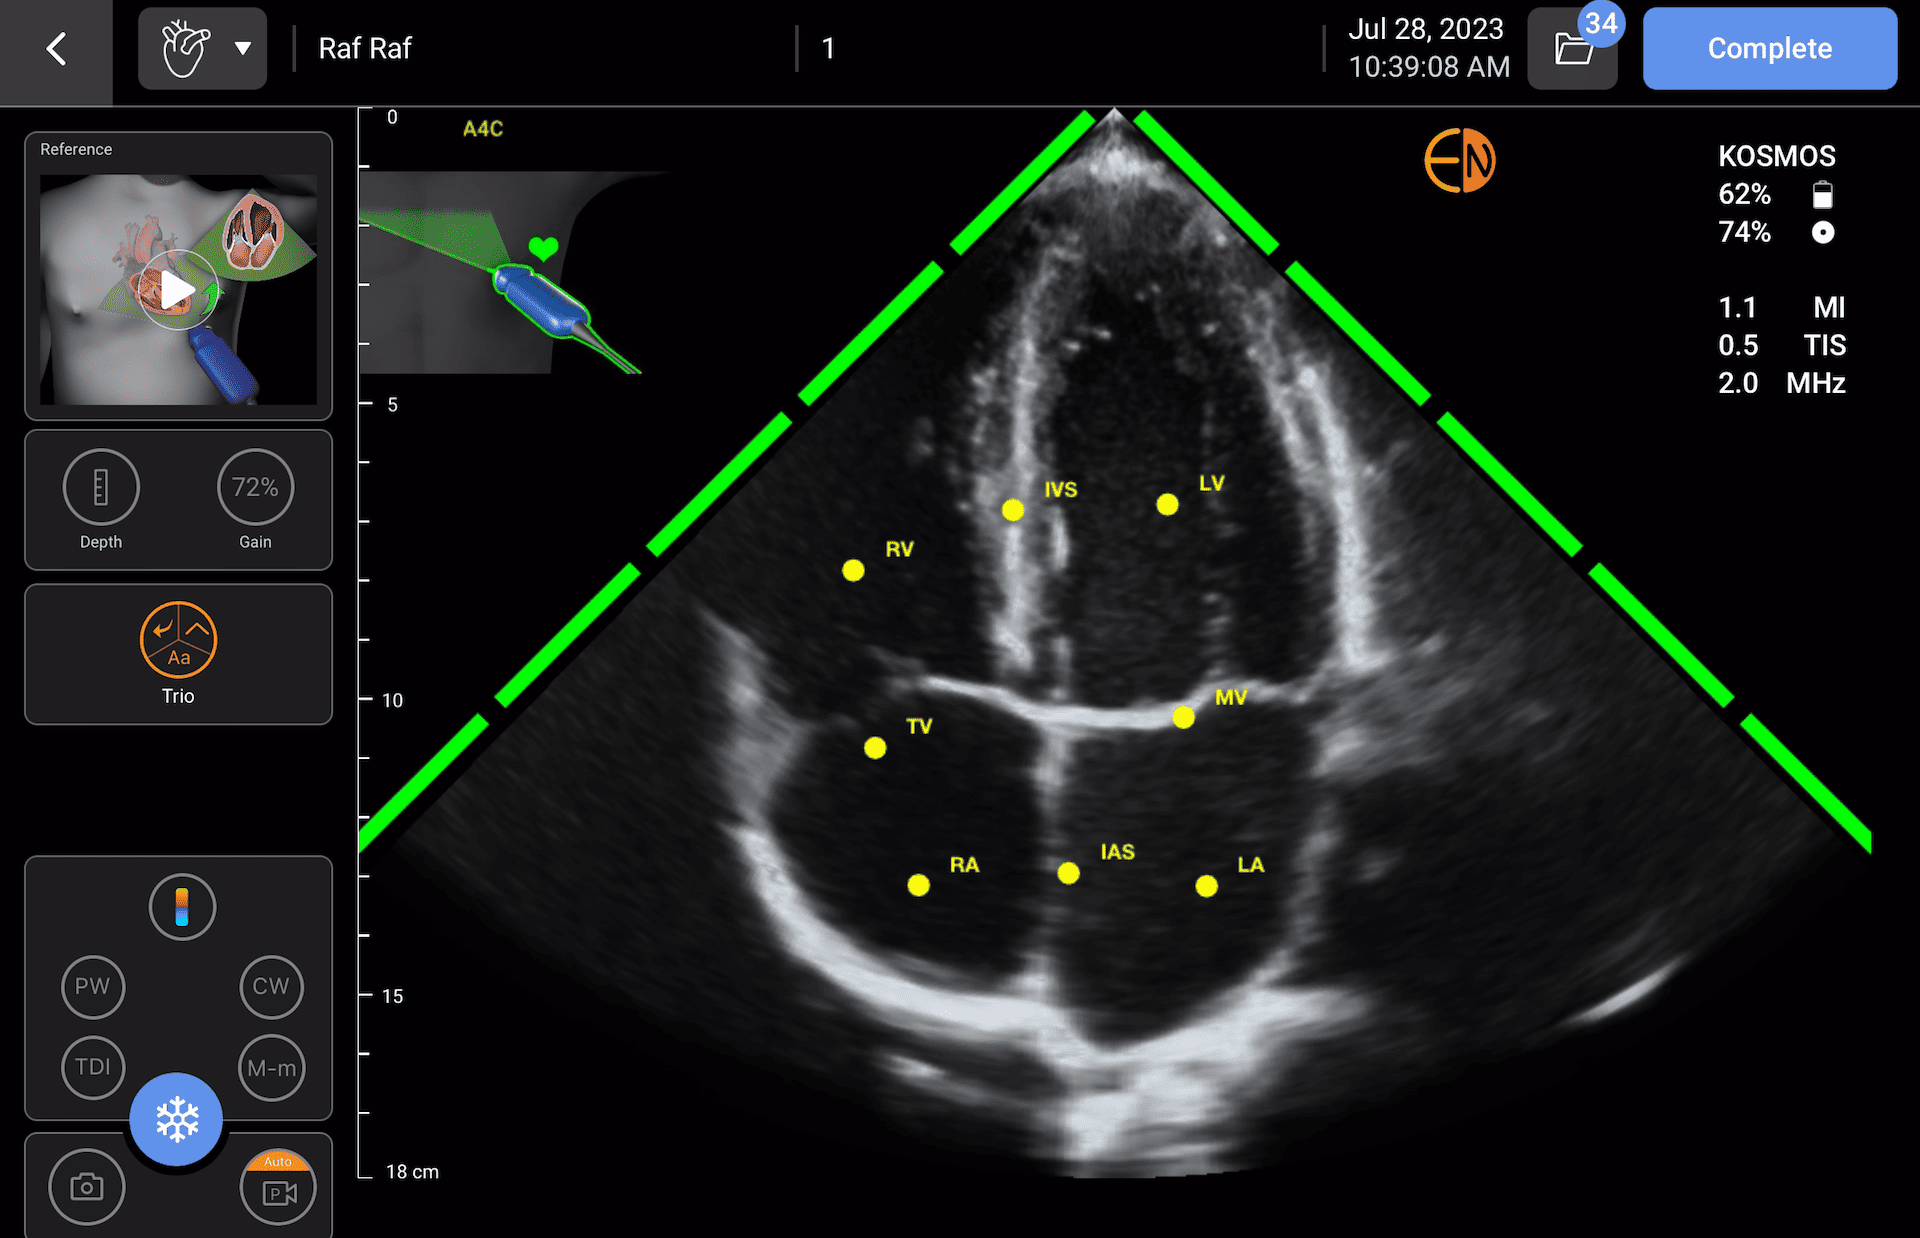 AI Handheld POCUS- automated guidance, grading, and labeling of cardiac anatomy